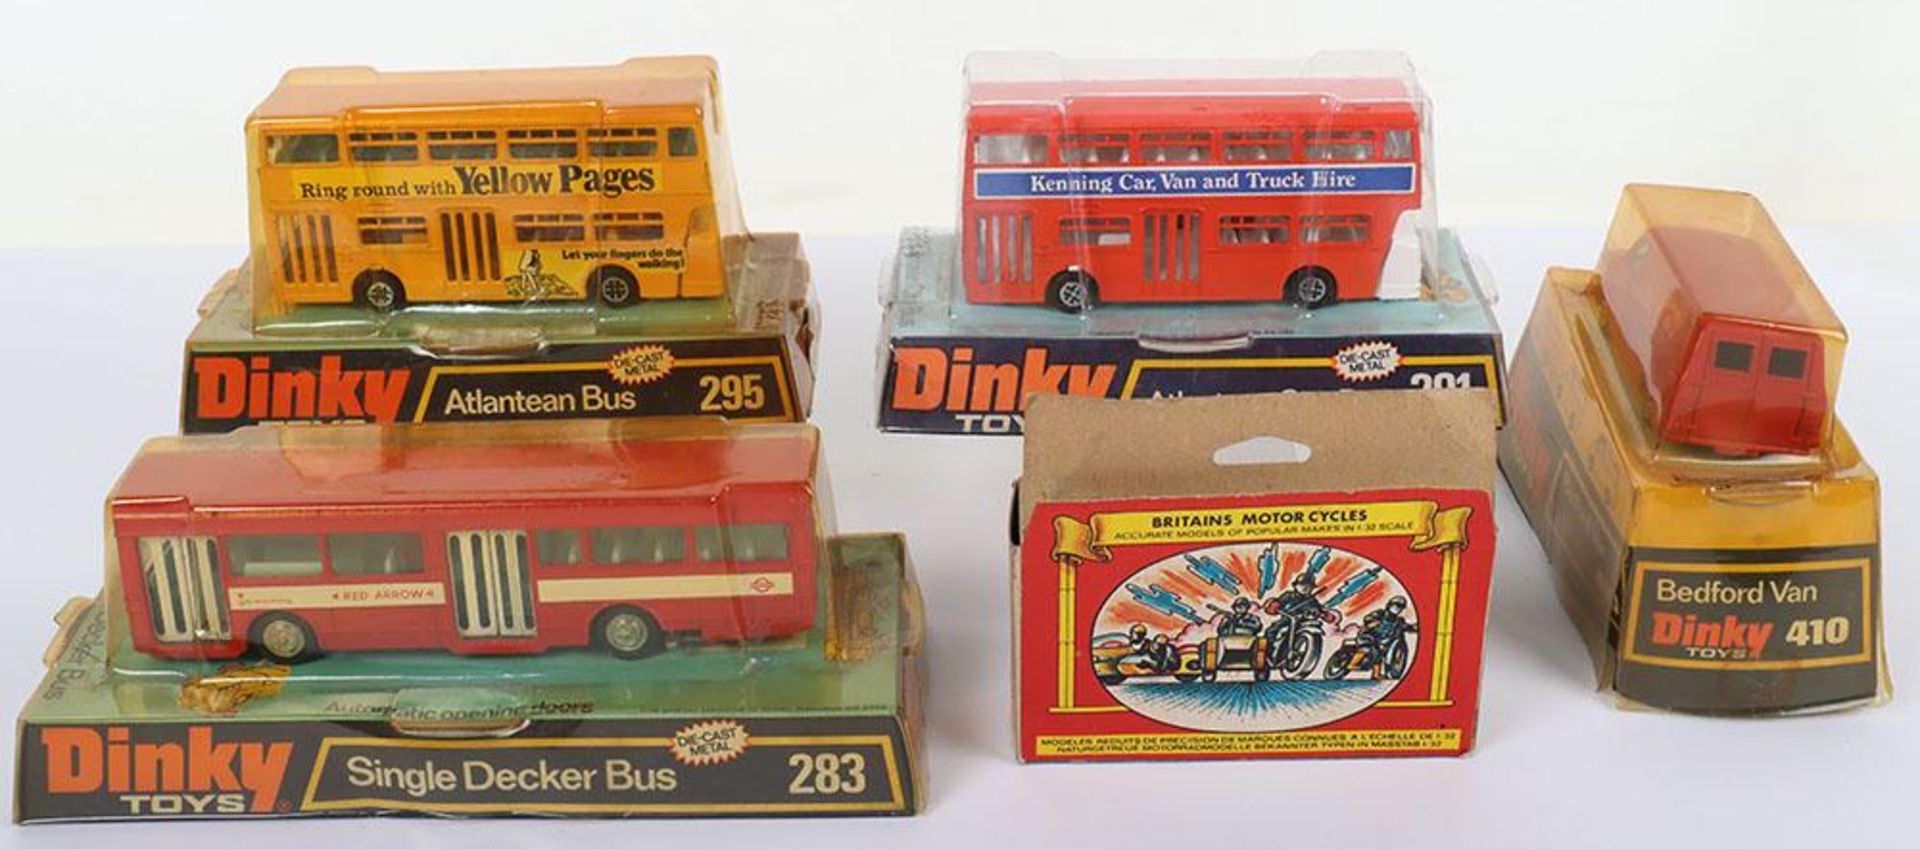 Dinky Toys Buses - Image 2 of 2